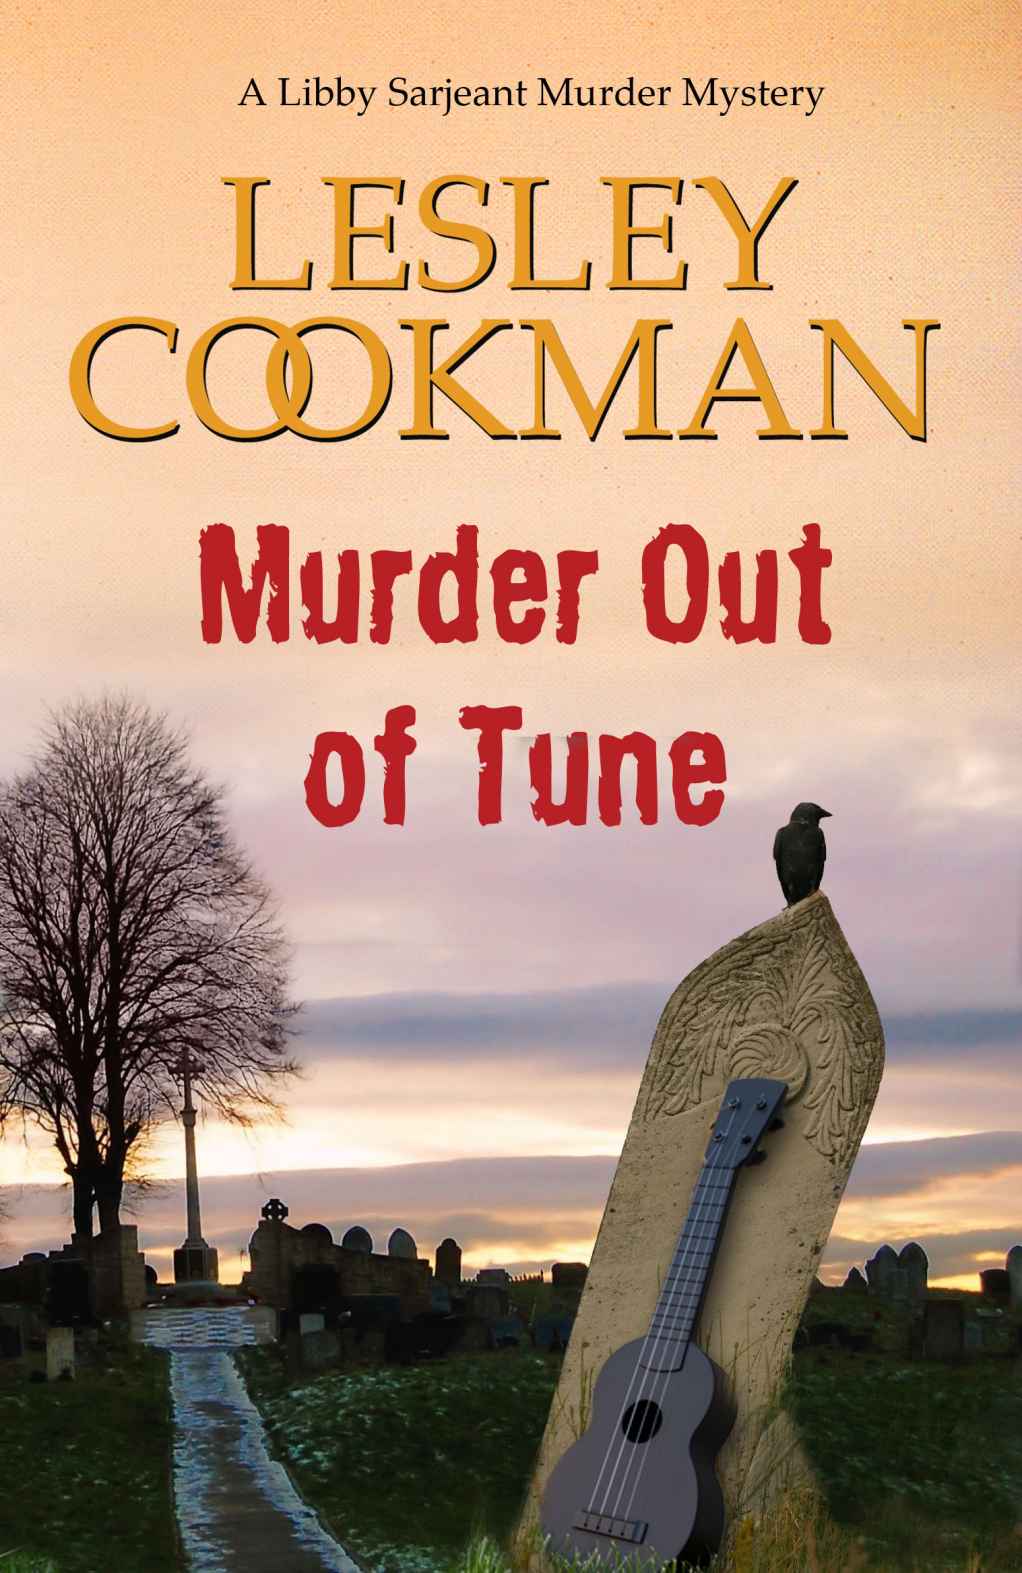 Murder Out of Tune - A Libby Sarjeant Murder Mystery